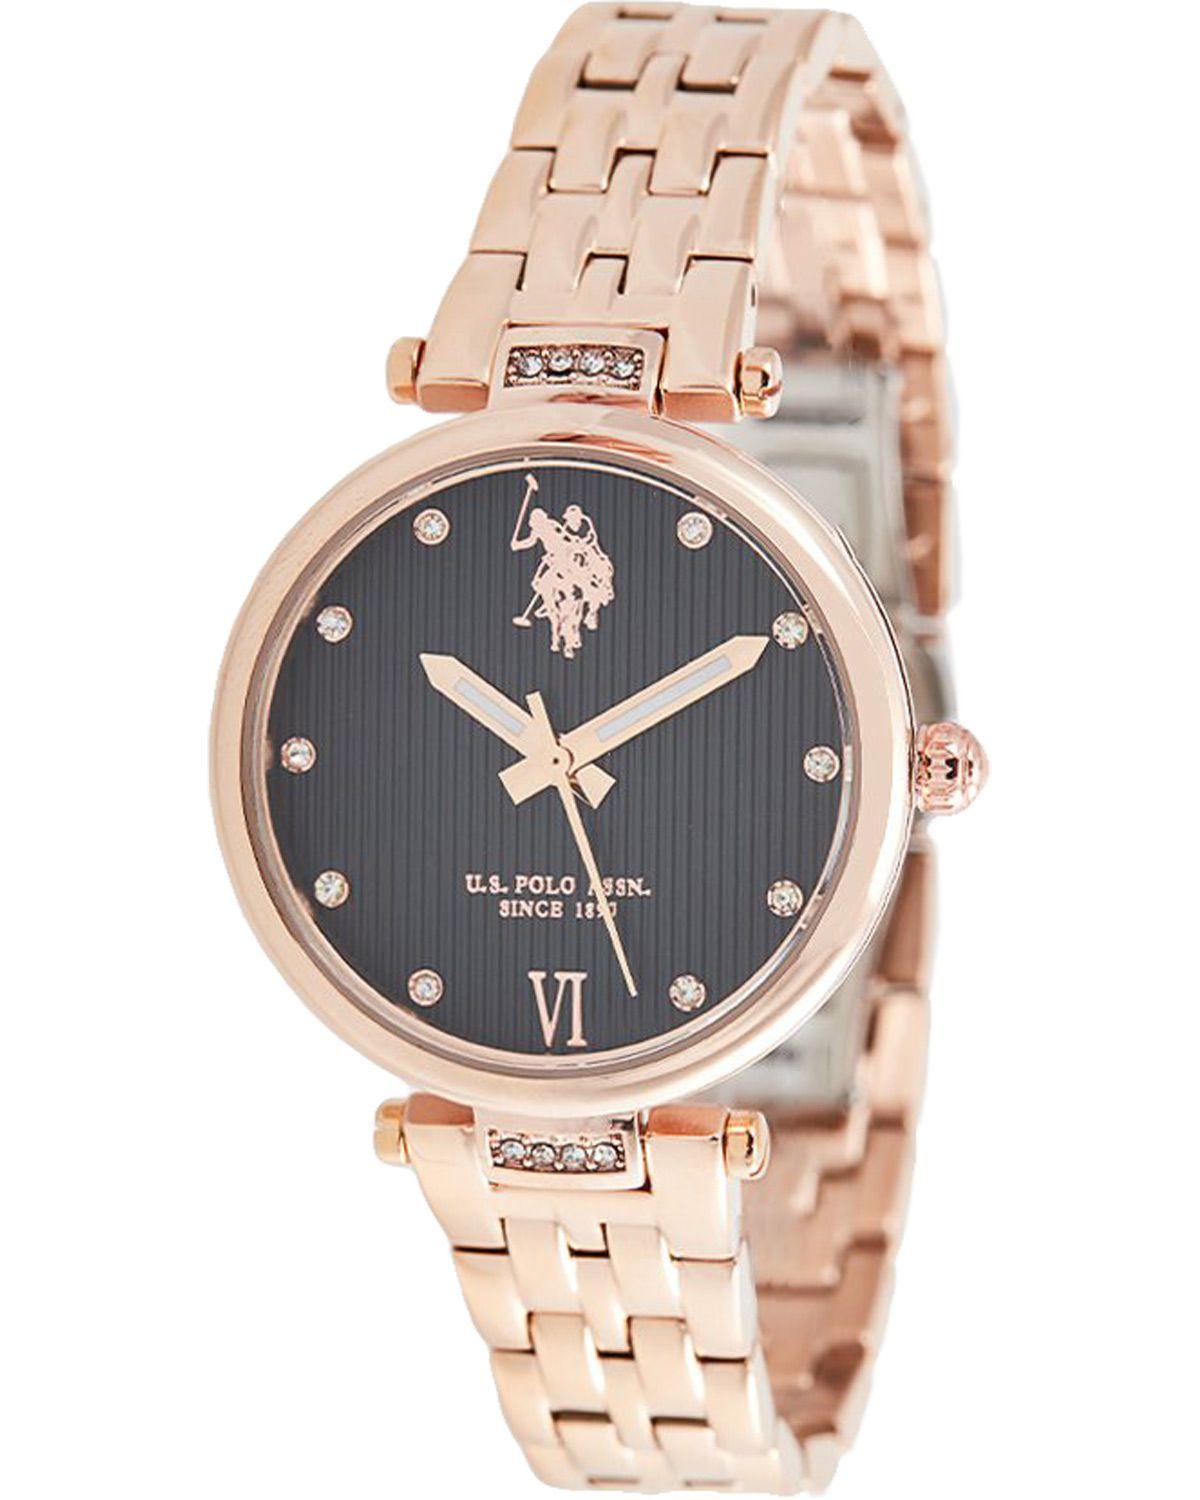 U.S. POLO Margot Crystals - USP5981BK, Rose Gold case with Stainless Steel Bracelet